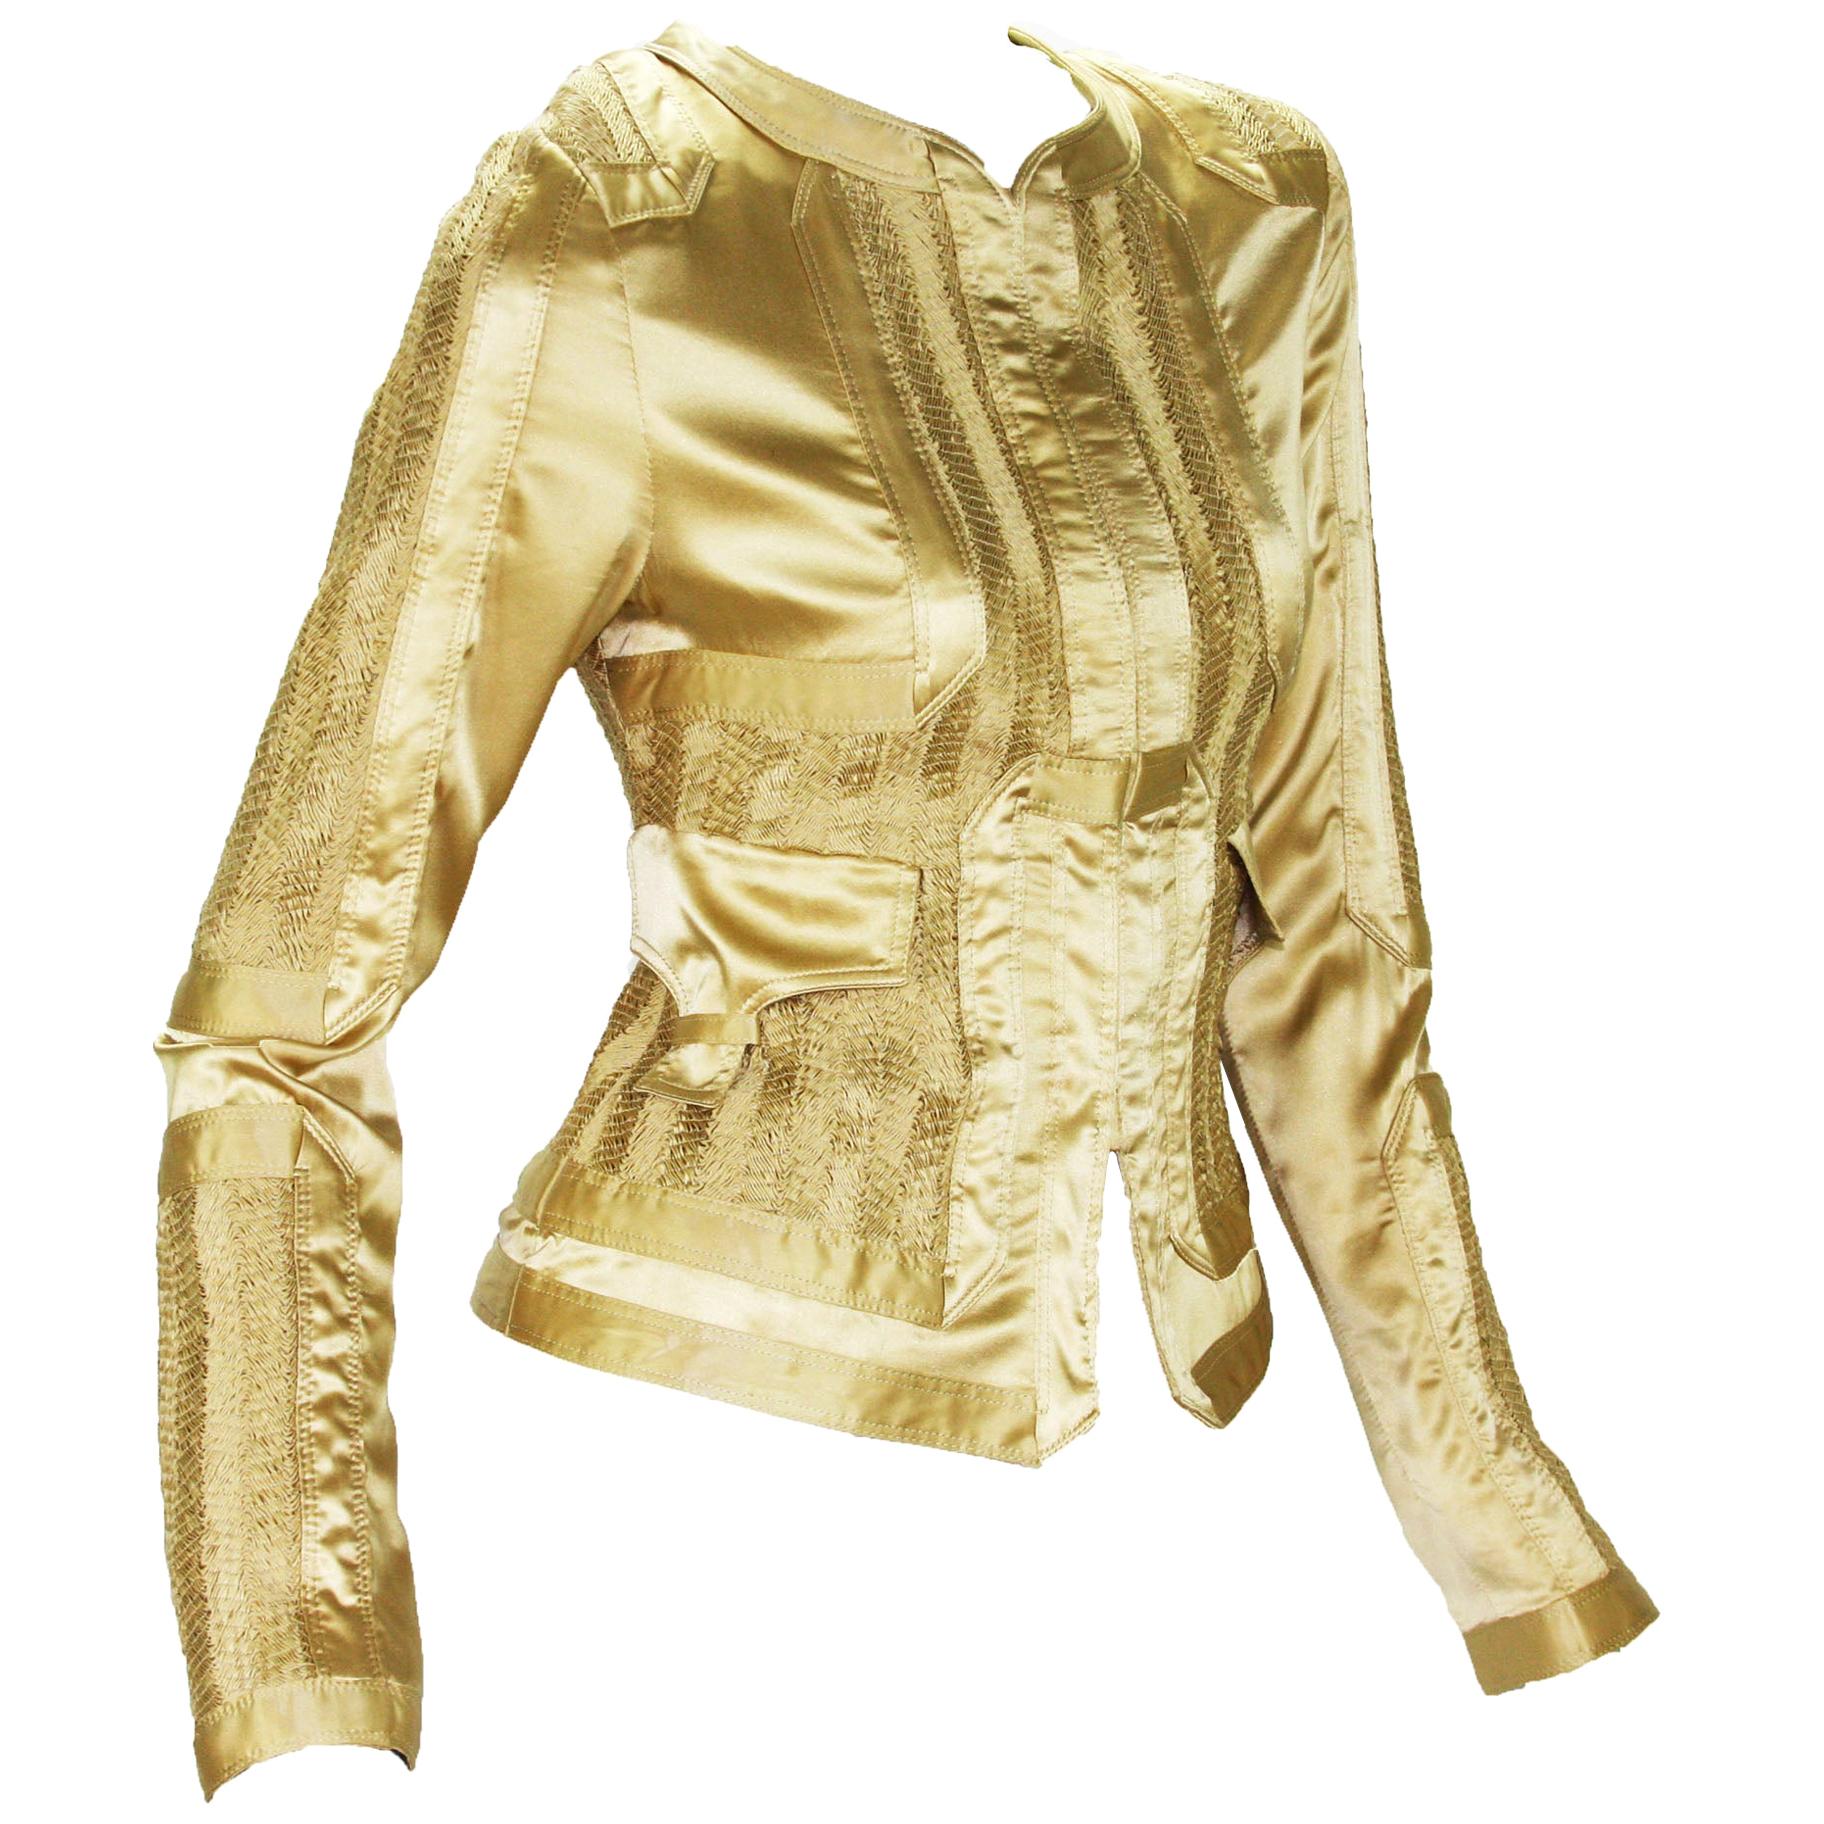 Tom Ford for Gucci 2004 Collection Gold Silk Limited Edition Jackets It.40  US 4